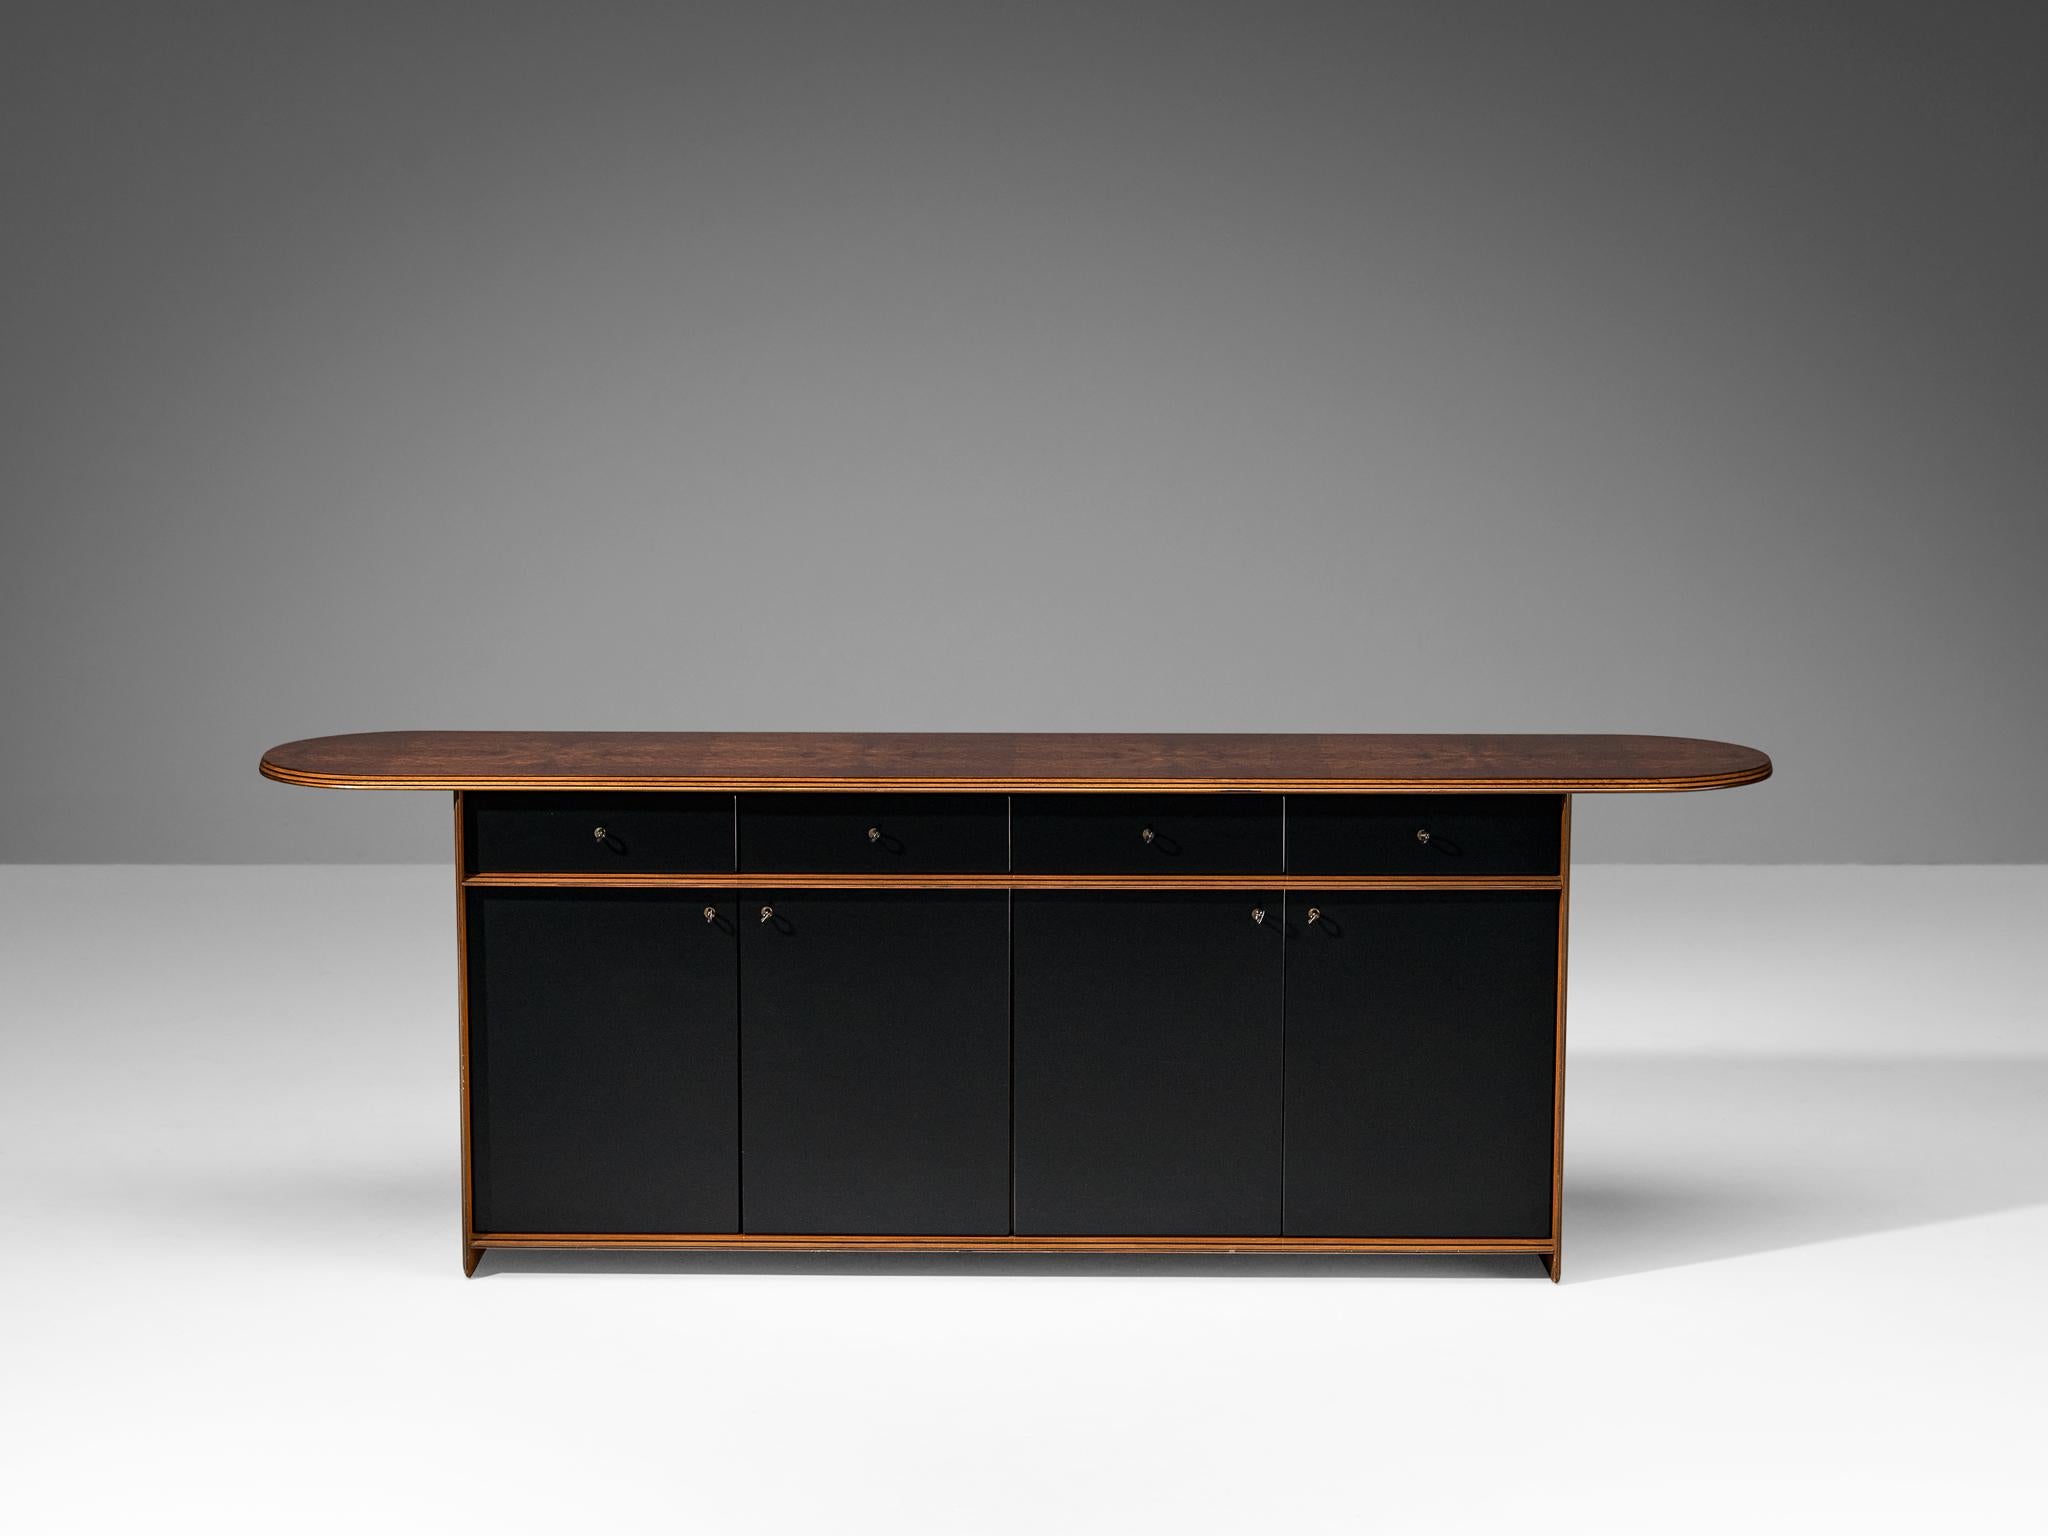 Afra & Tobia Scarpa for Maxalto, sideboard, walnut, leather, Italy, 1970s

Gorgeous sideboard made in walnut and leather and designed by duo Afra and Tobia Scarpa in the 1970s. This sideboard with a leather front is designed as part of the ‘Artona’